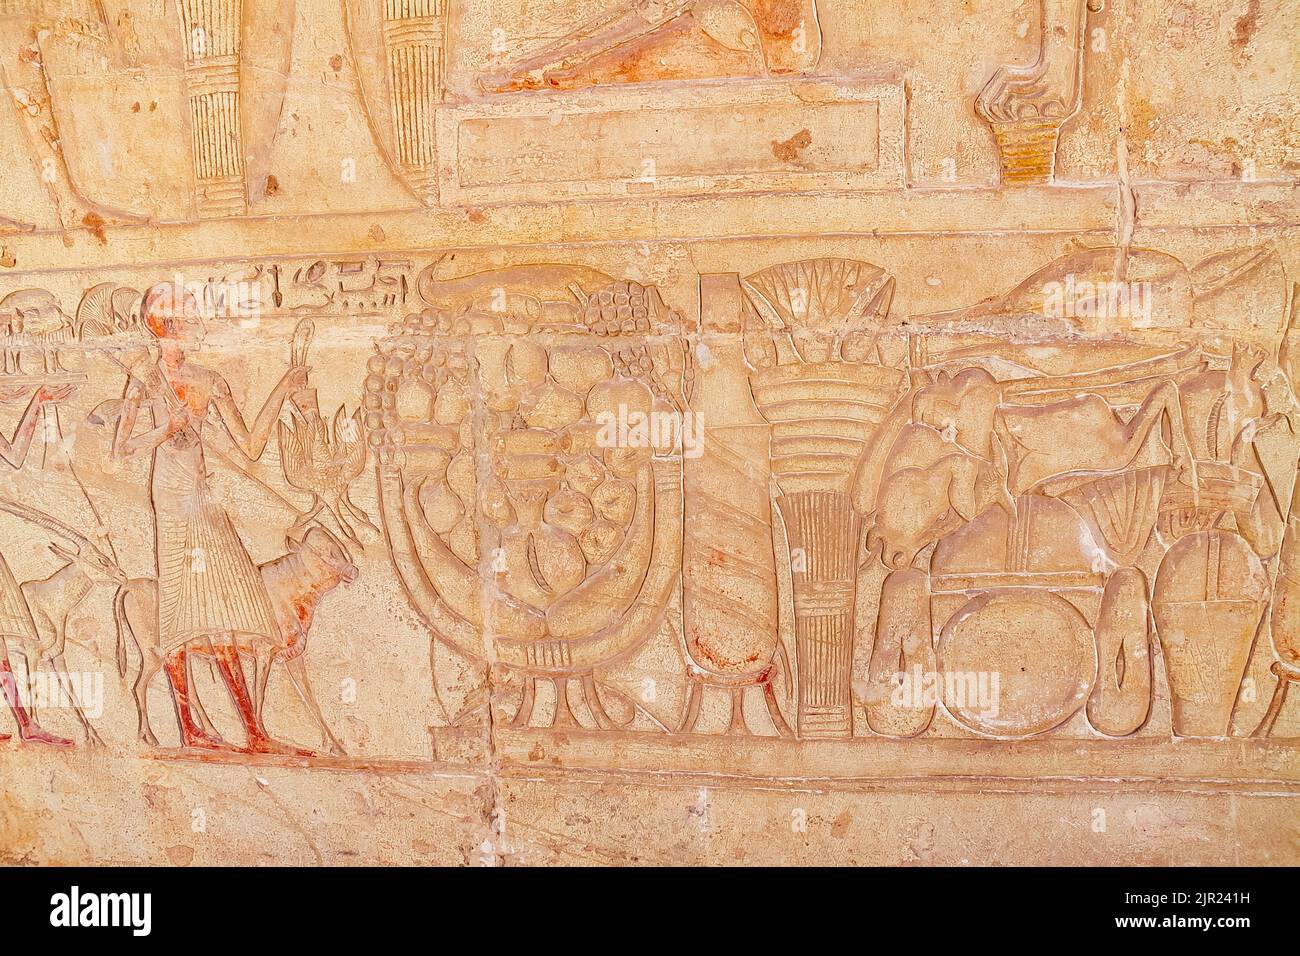 Egypt, Saqqara,  tomb of Horemheb,  statue room, procession of offering bearers. Stock Photo